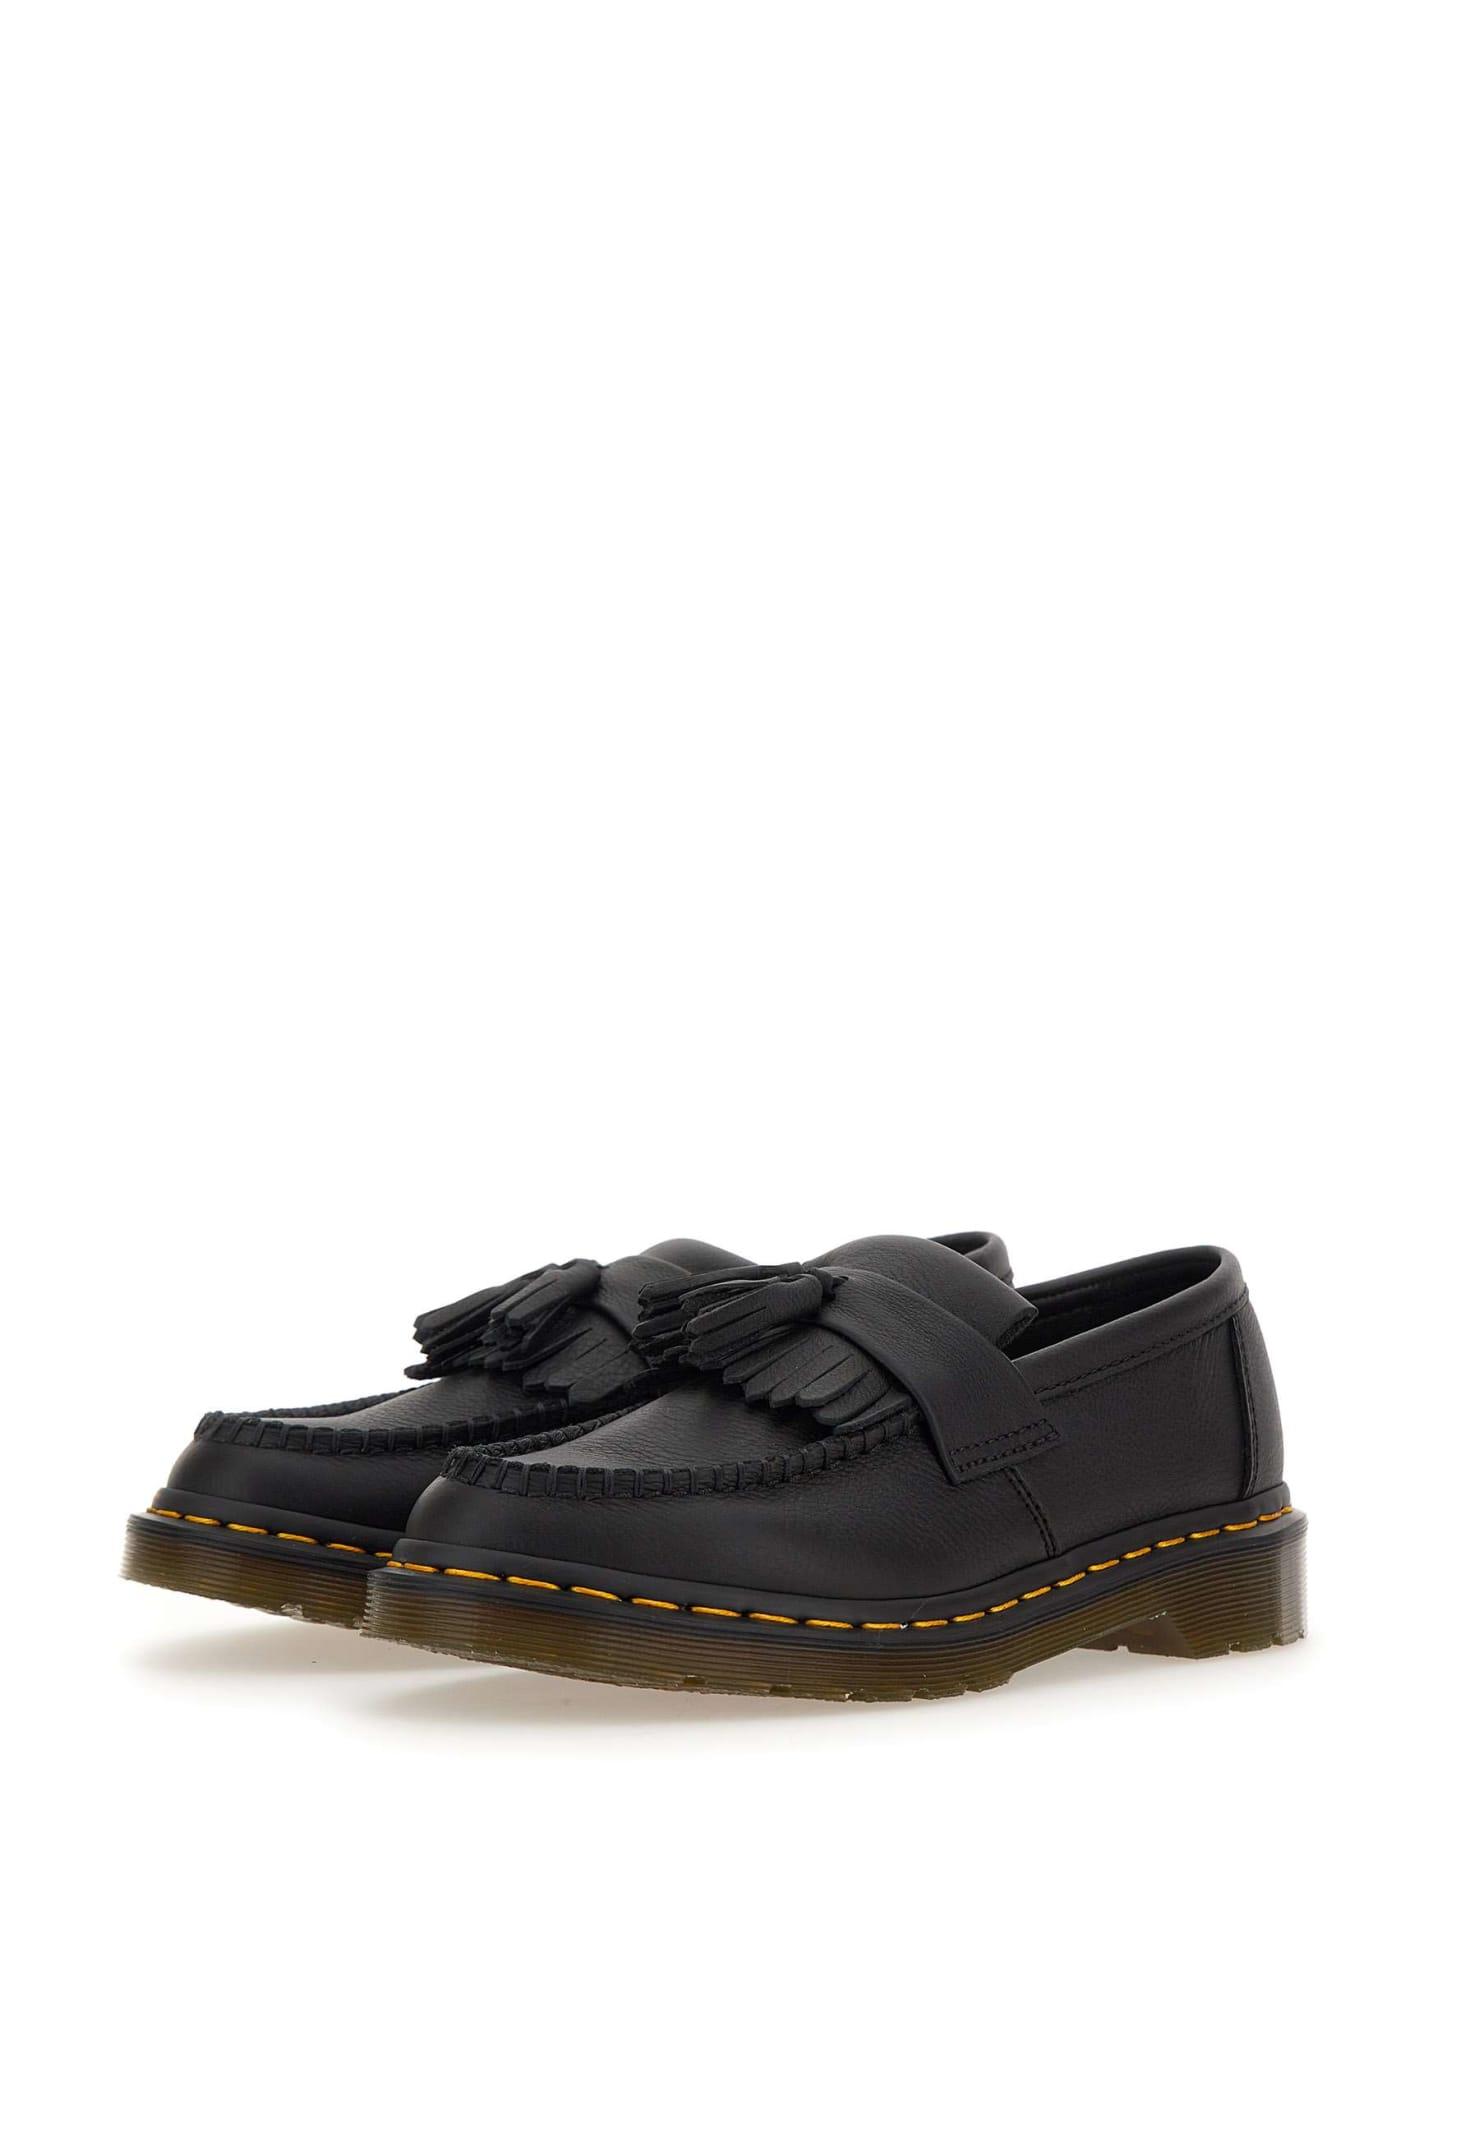 Dr. Martens "adrian Virginia" Leather Moccasin in Black | Lyst